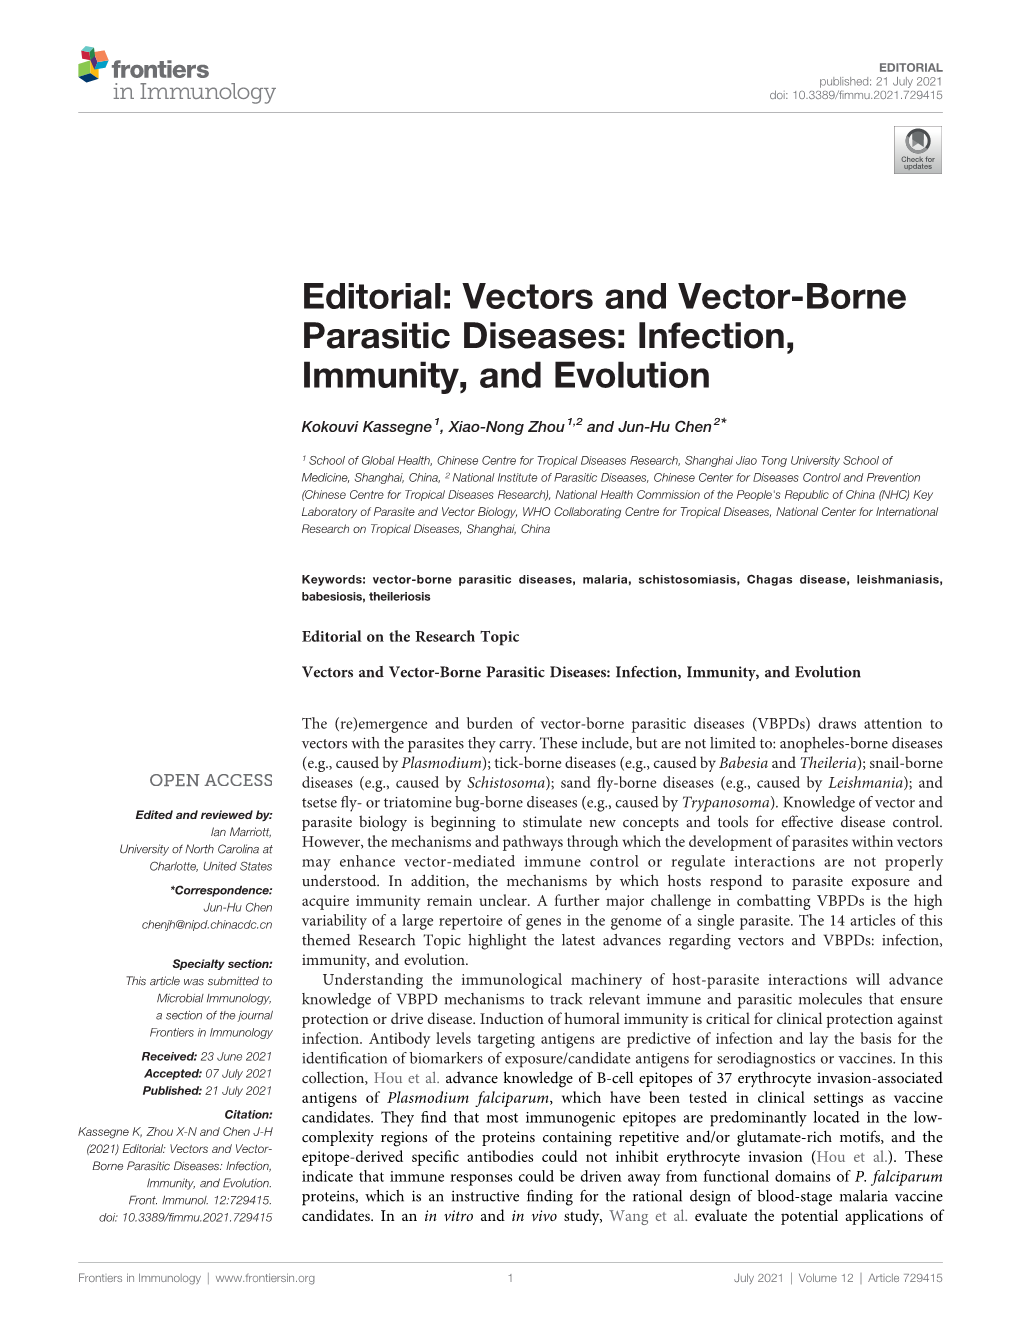 Vectors and Vector-Borne Parasitic Diseases: Infection, Immunity, and Evolution